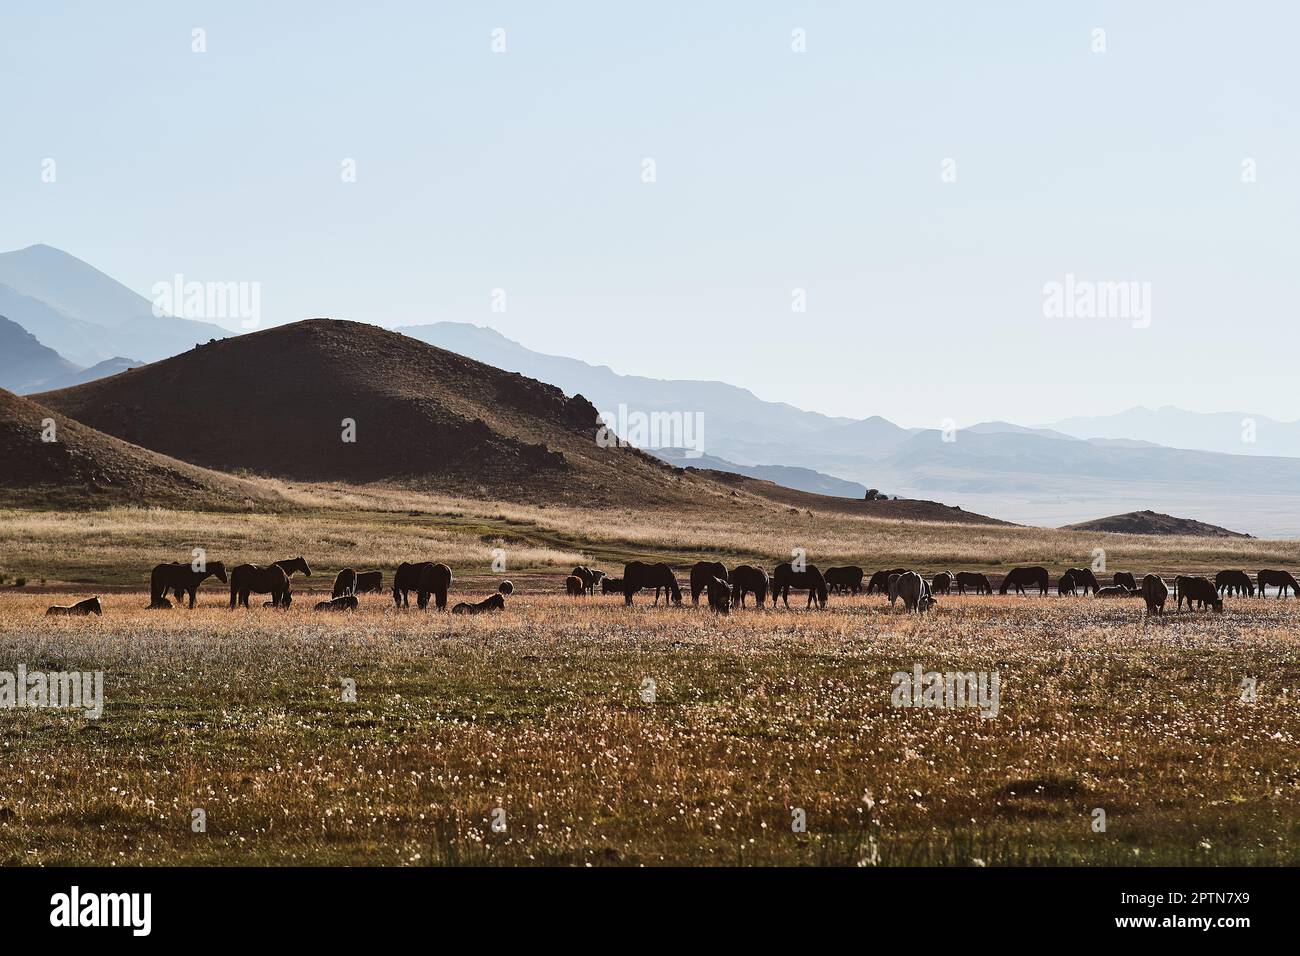 Horses standing on field, hills on the background Stock Photo